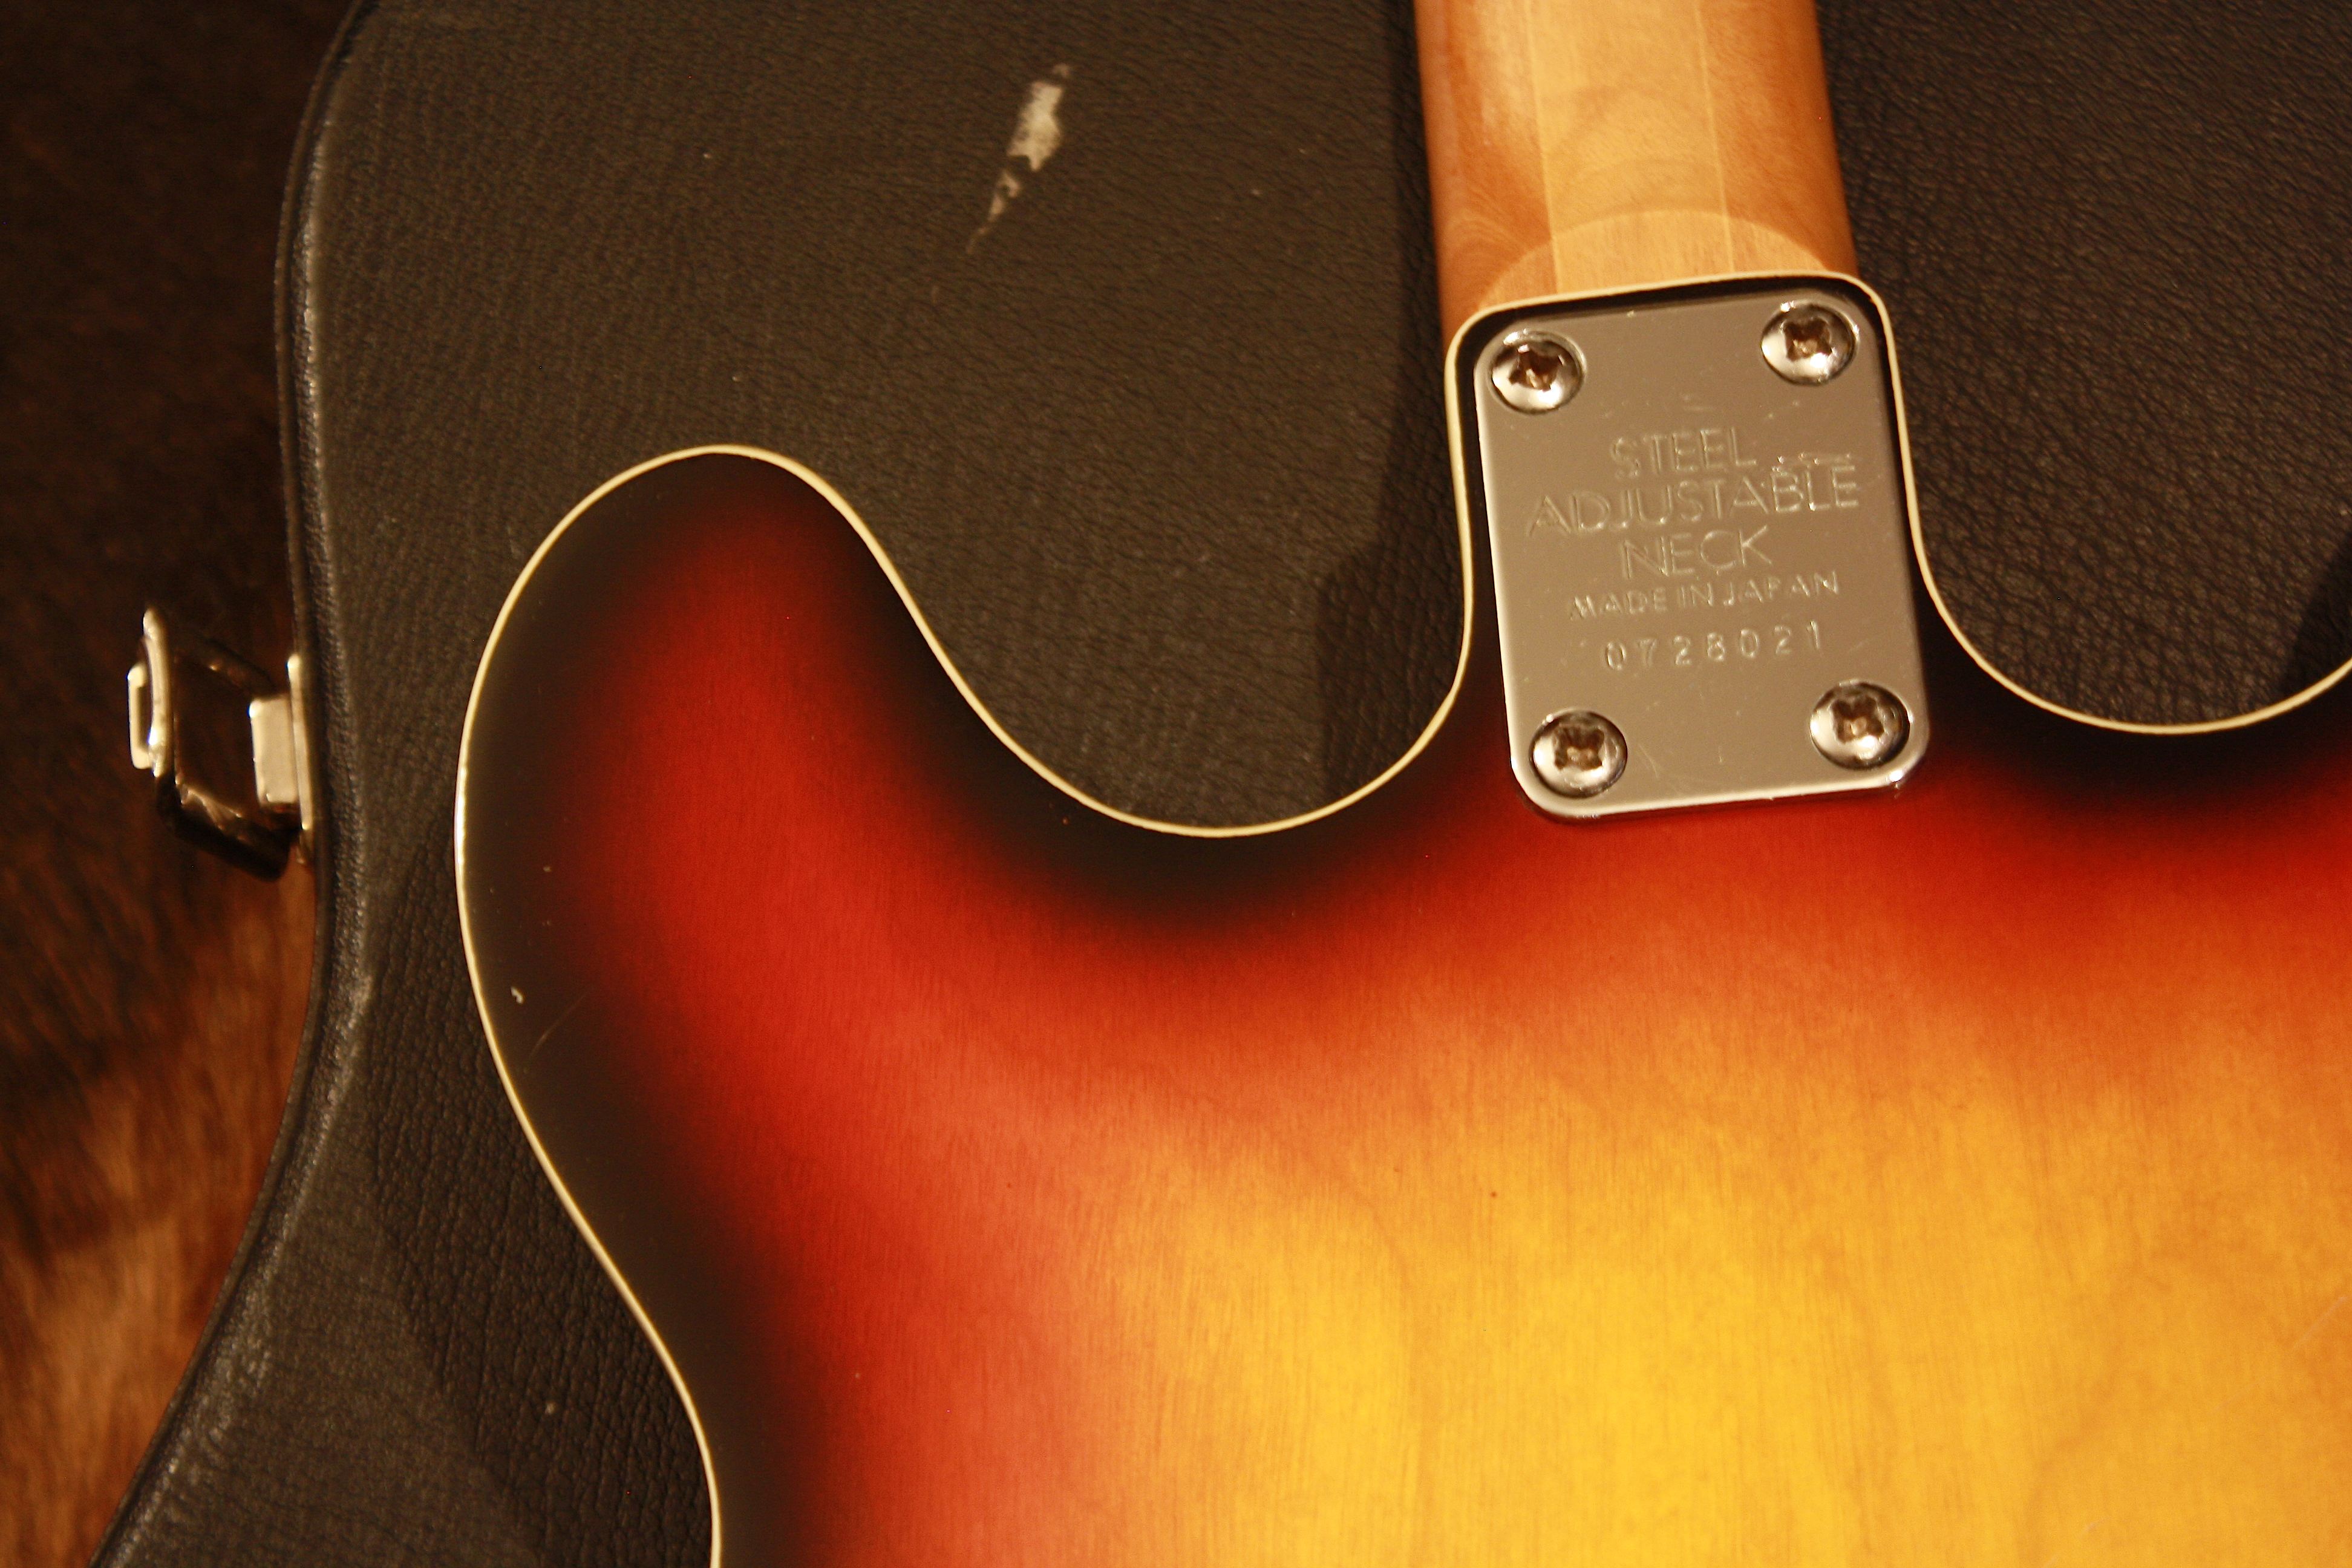 charvel serial numbers search